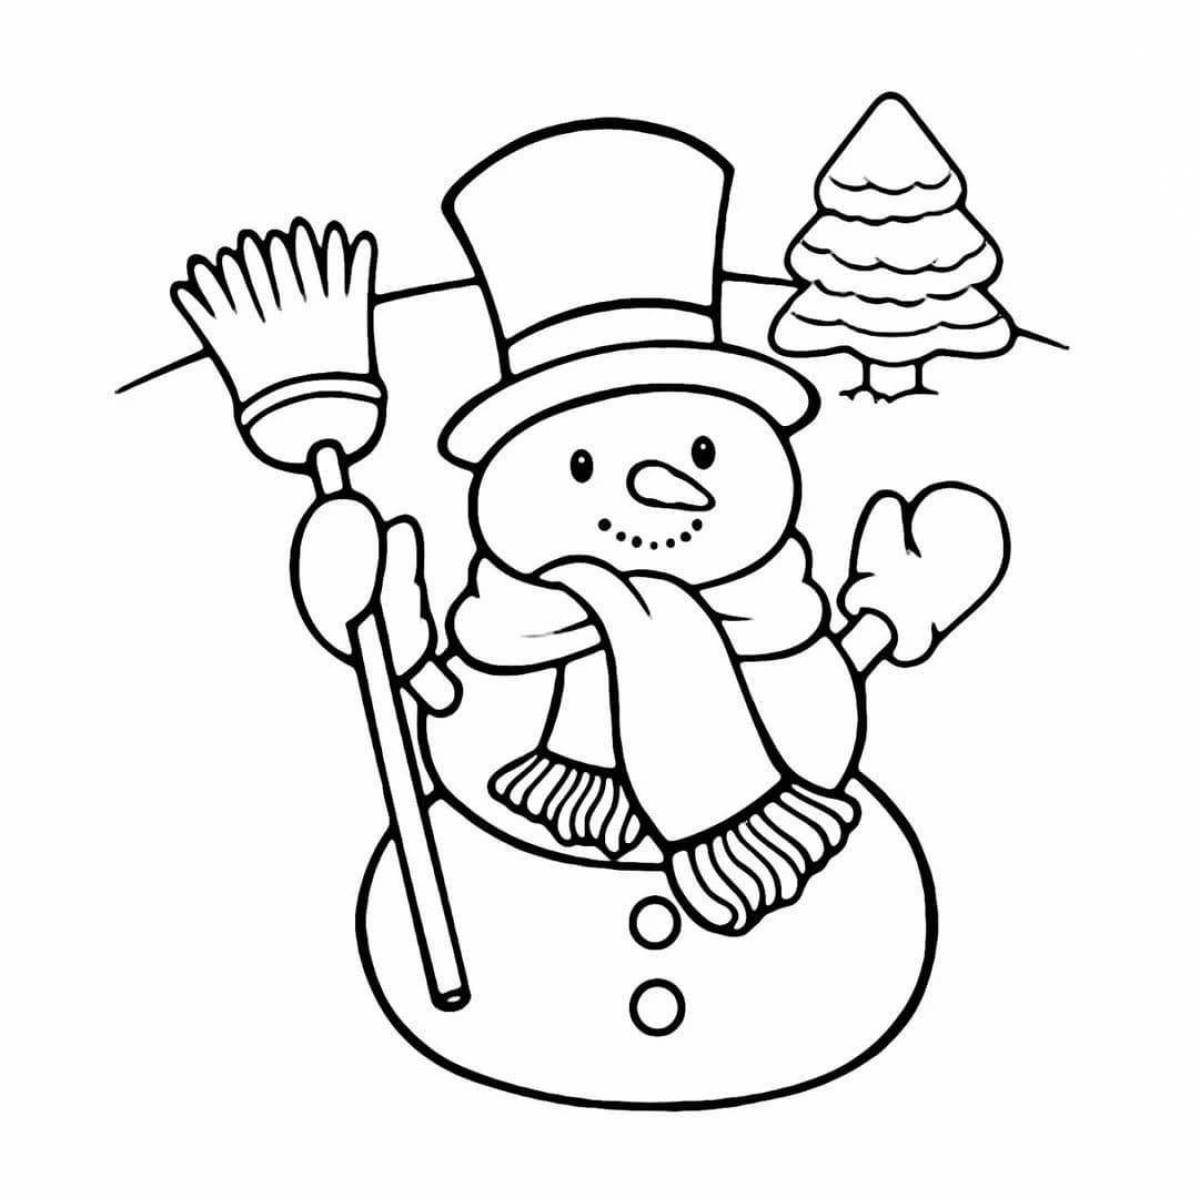 A funny snowman coloring book for kids